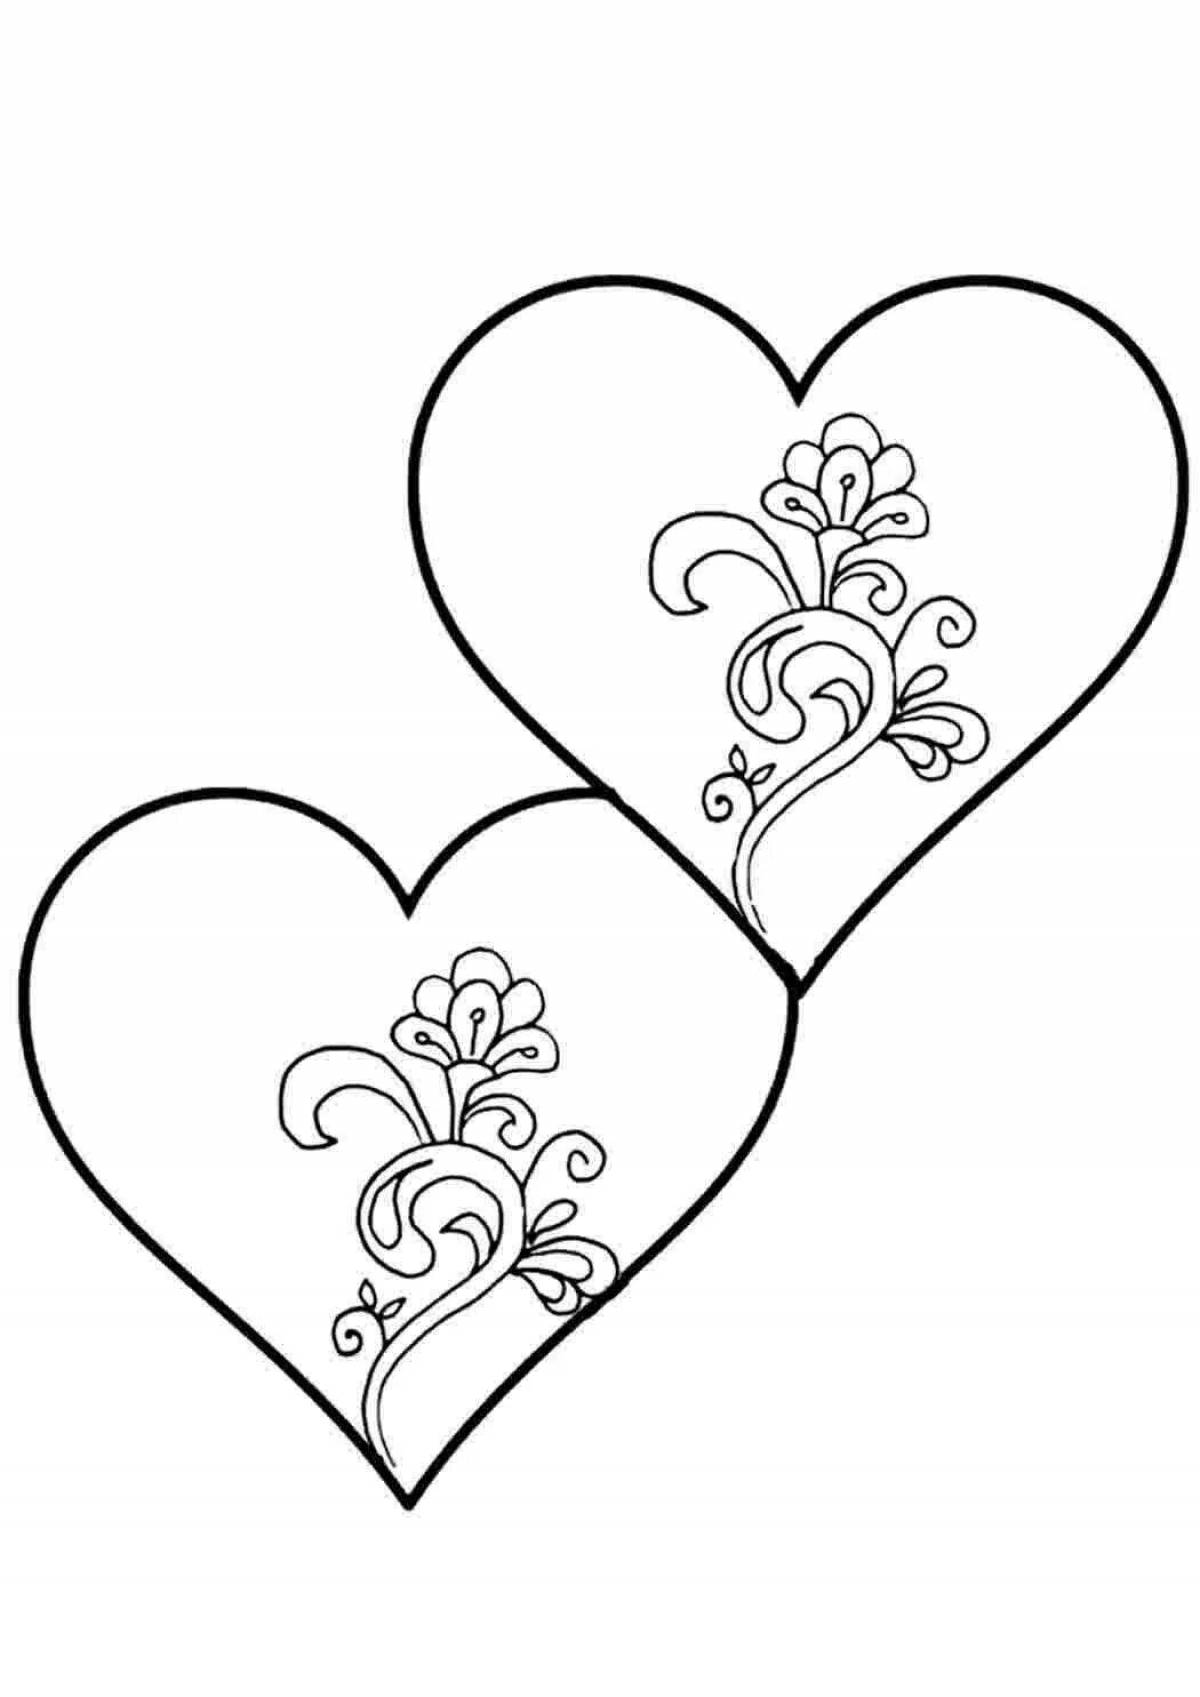 Fabulous valentines coloring pages for kids